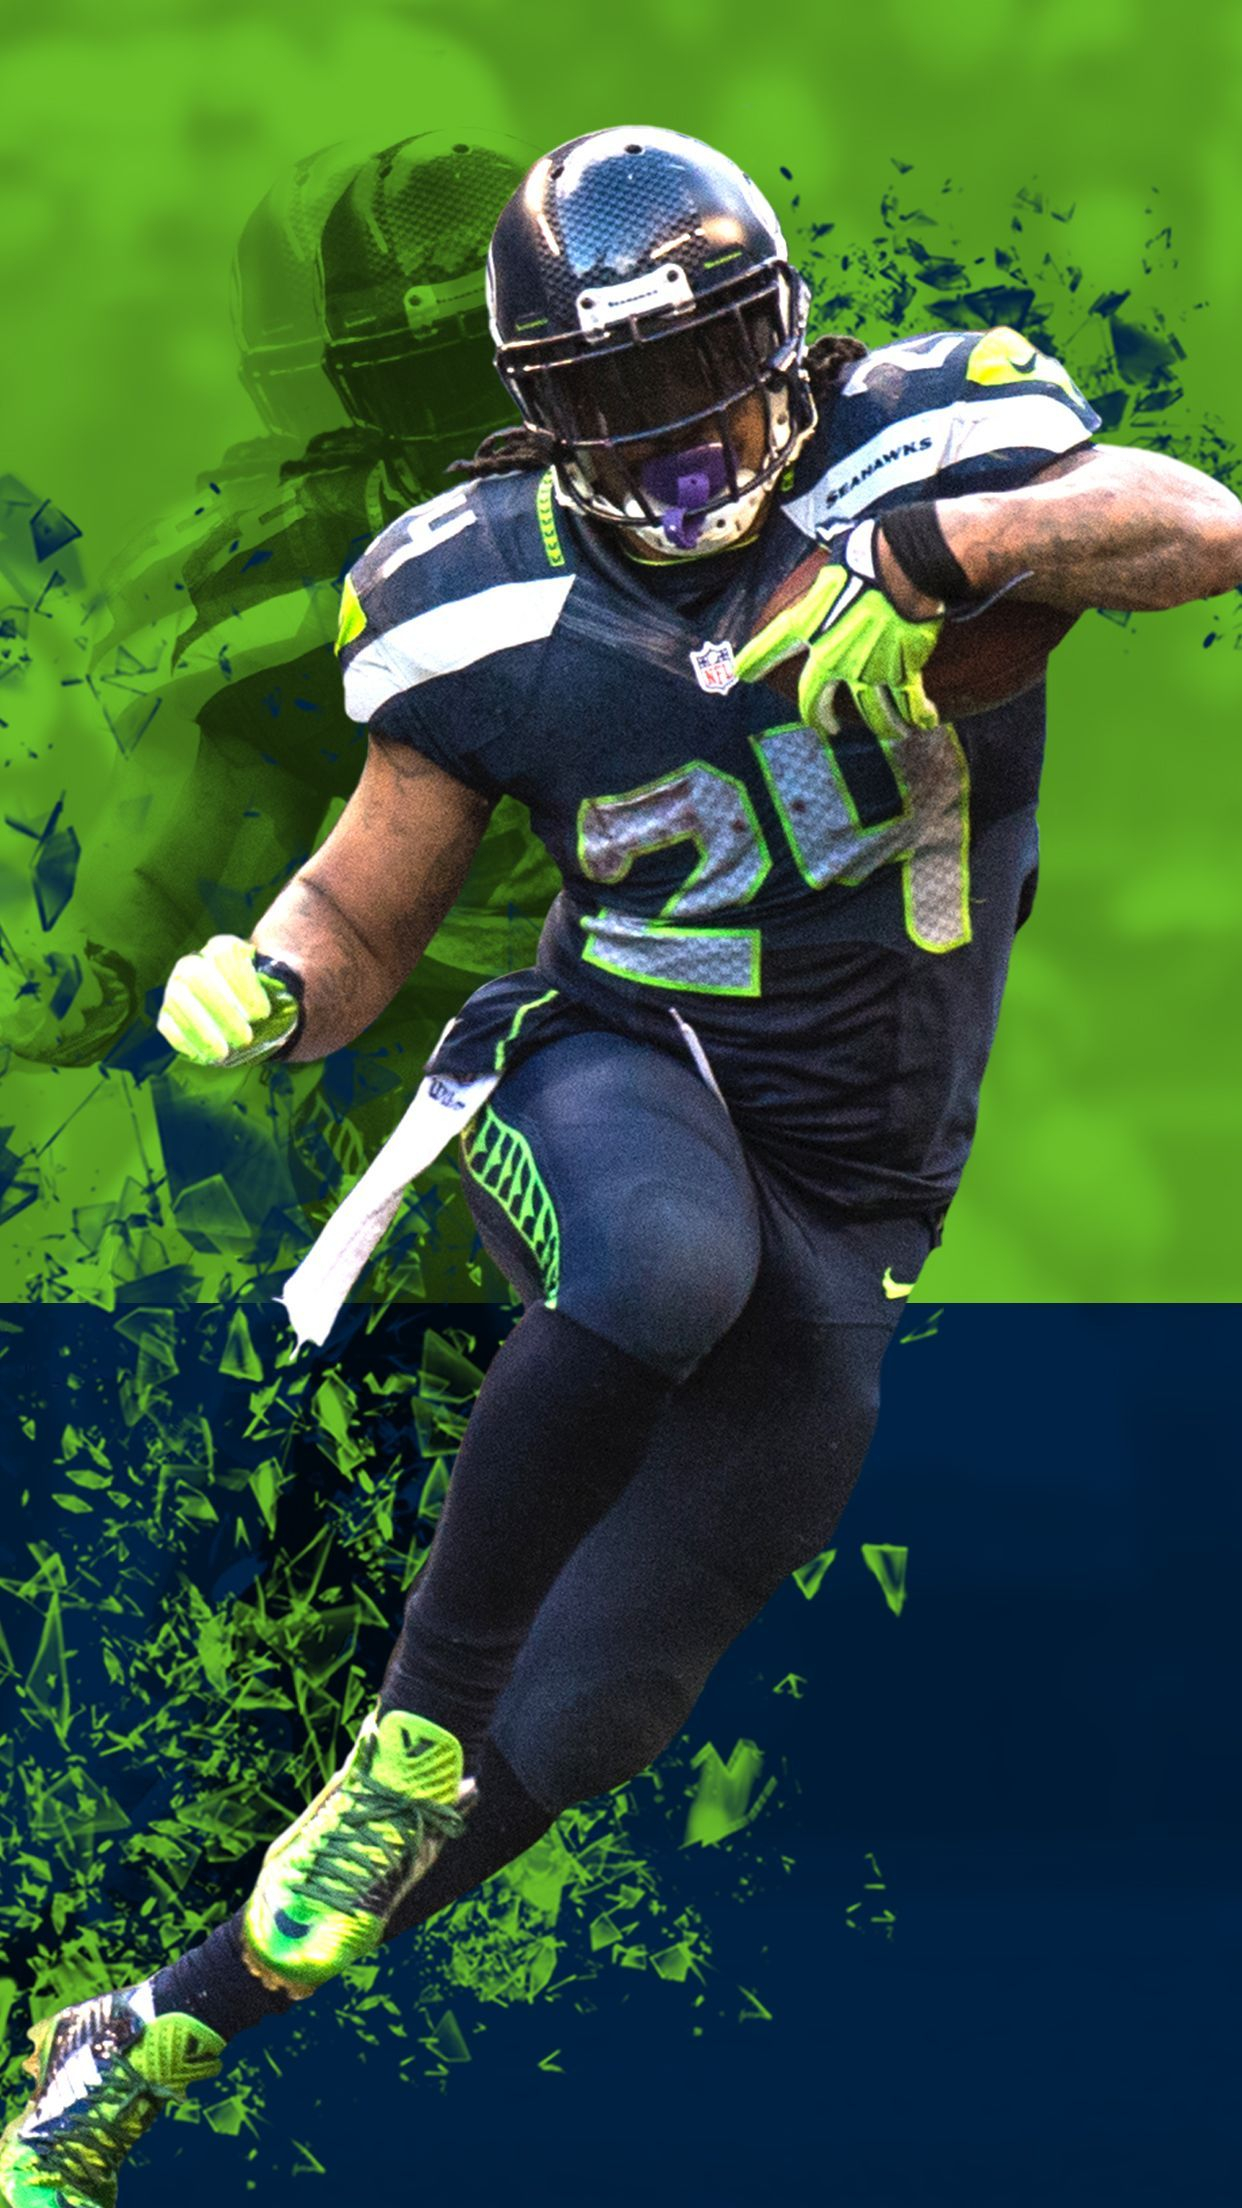 1242x2208 70+ Seahawks iPhone Wallpapers Download at WallpaperBro | Seattle seahawks, Seattle seahawks football, Seahawks